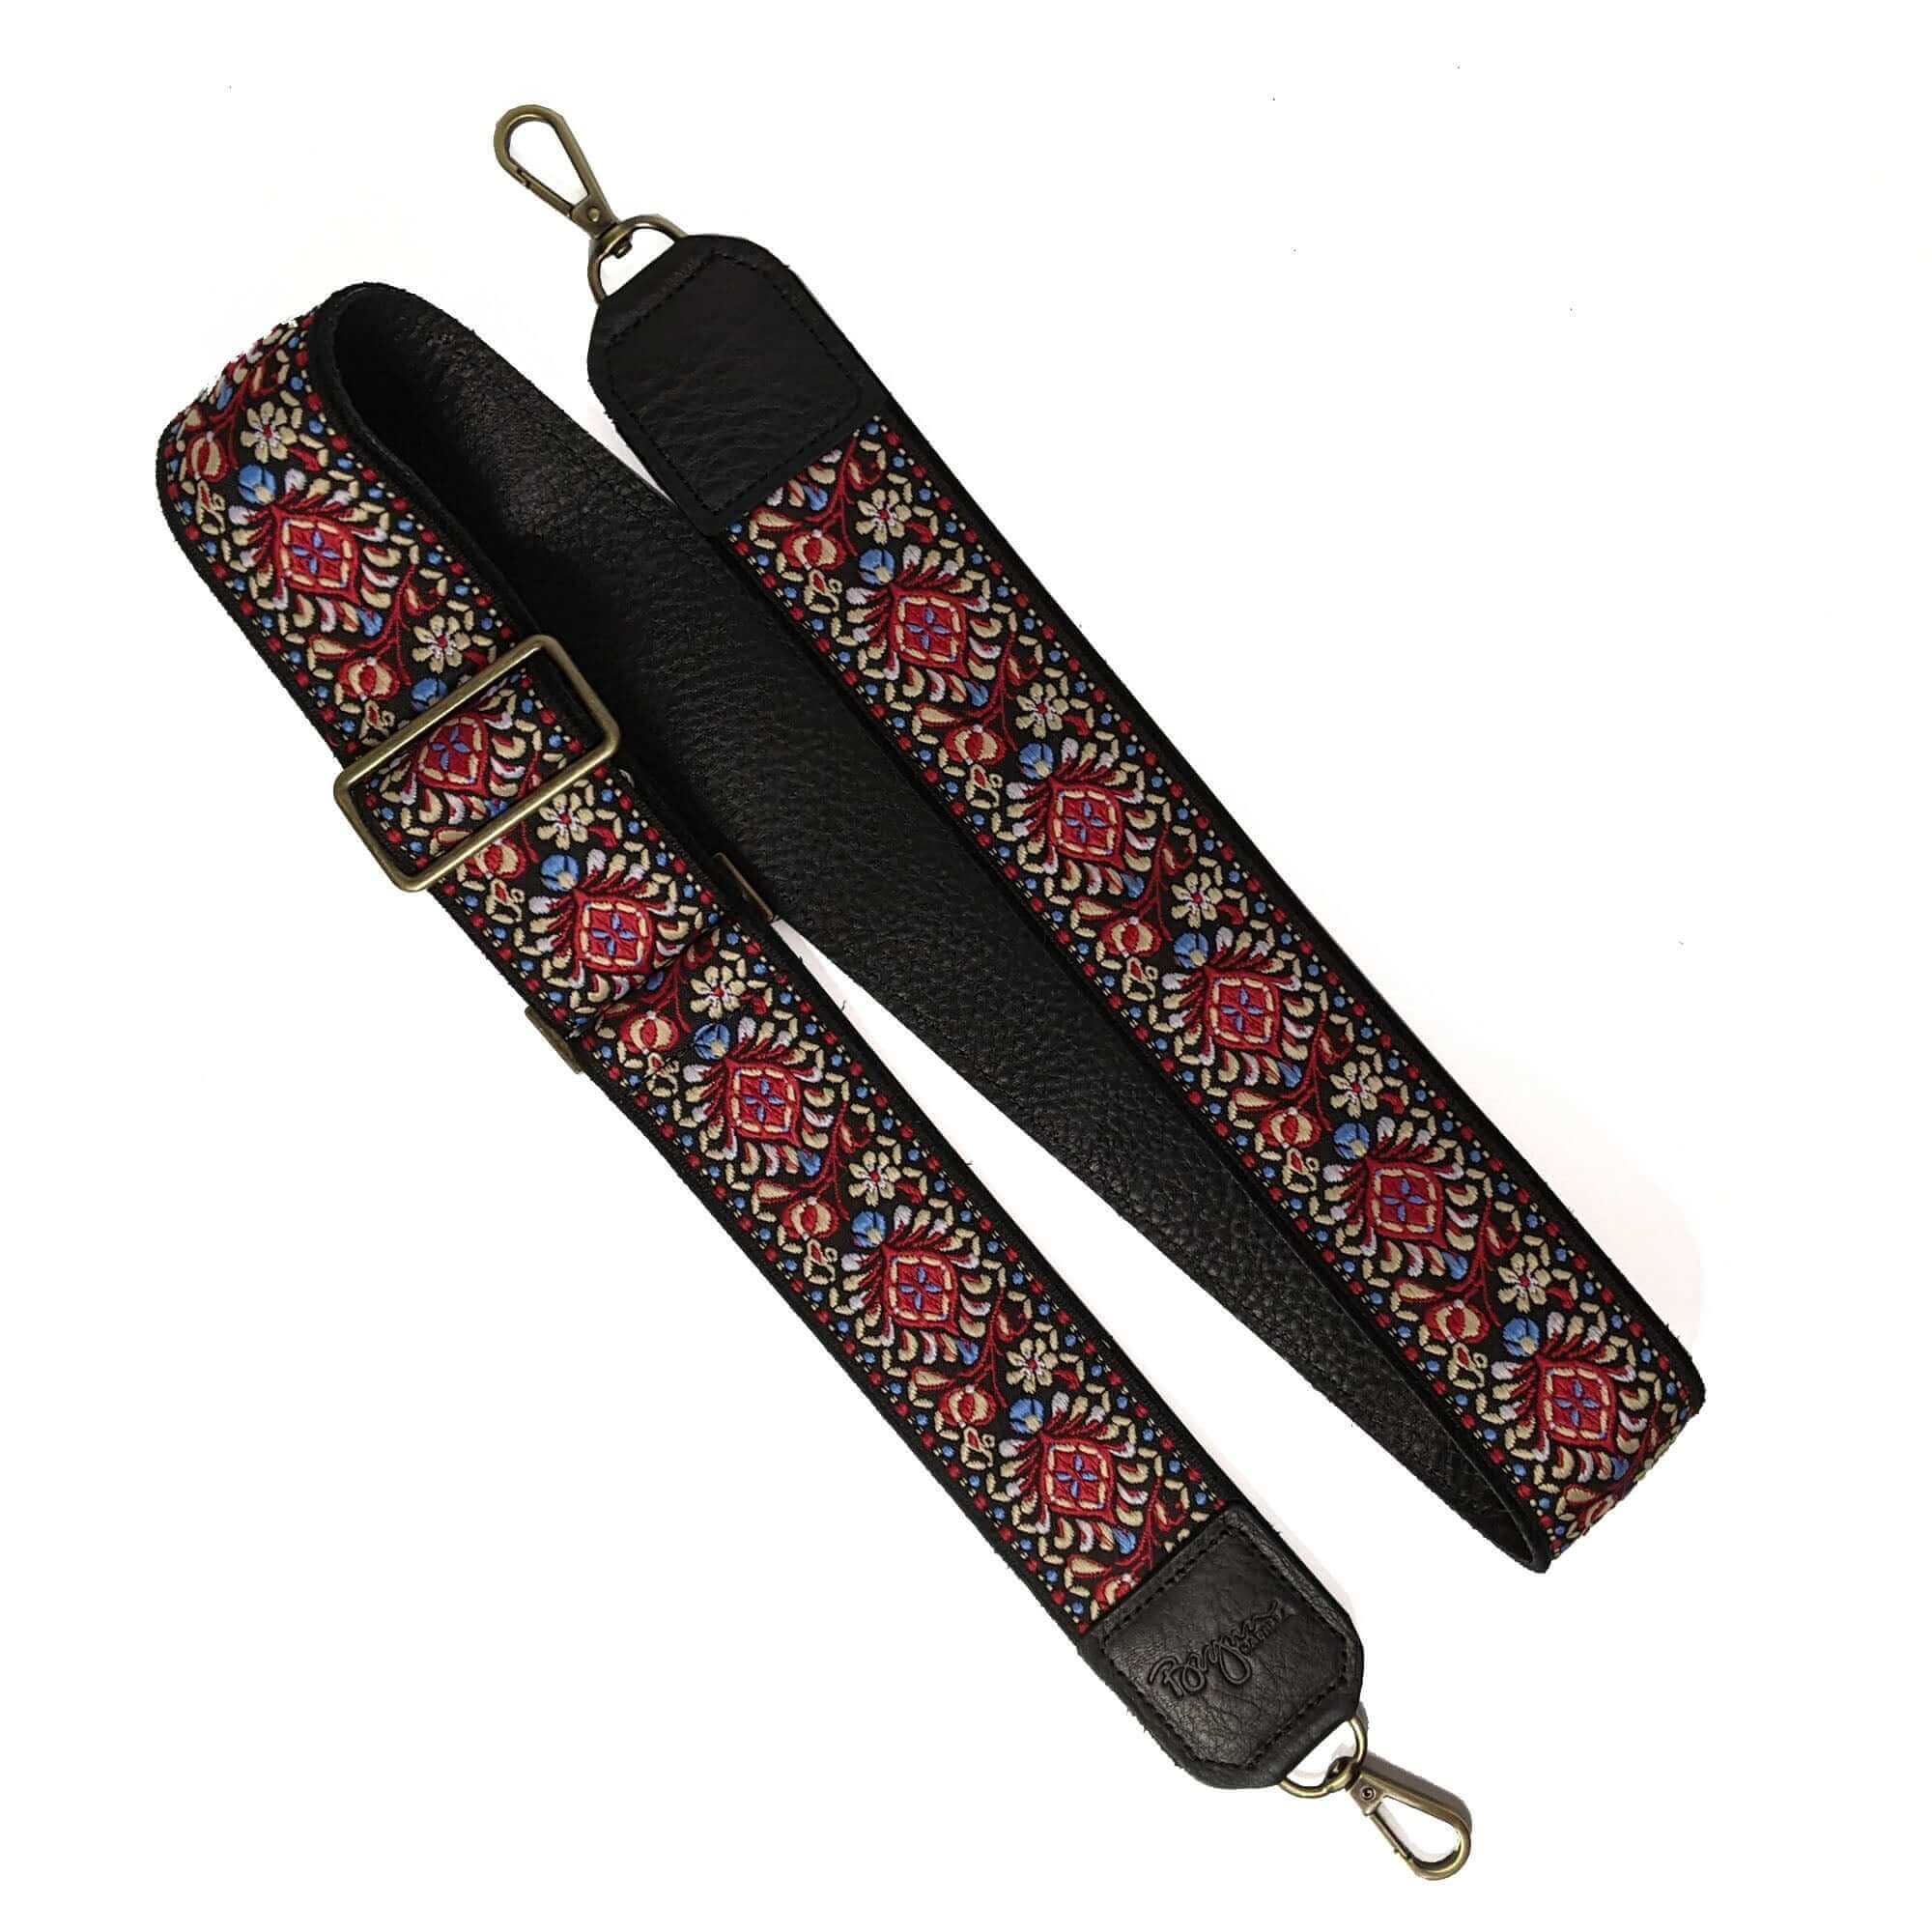 Narrow Embroidered Guitar Straps for Handbags – Modern Millie